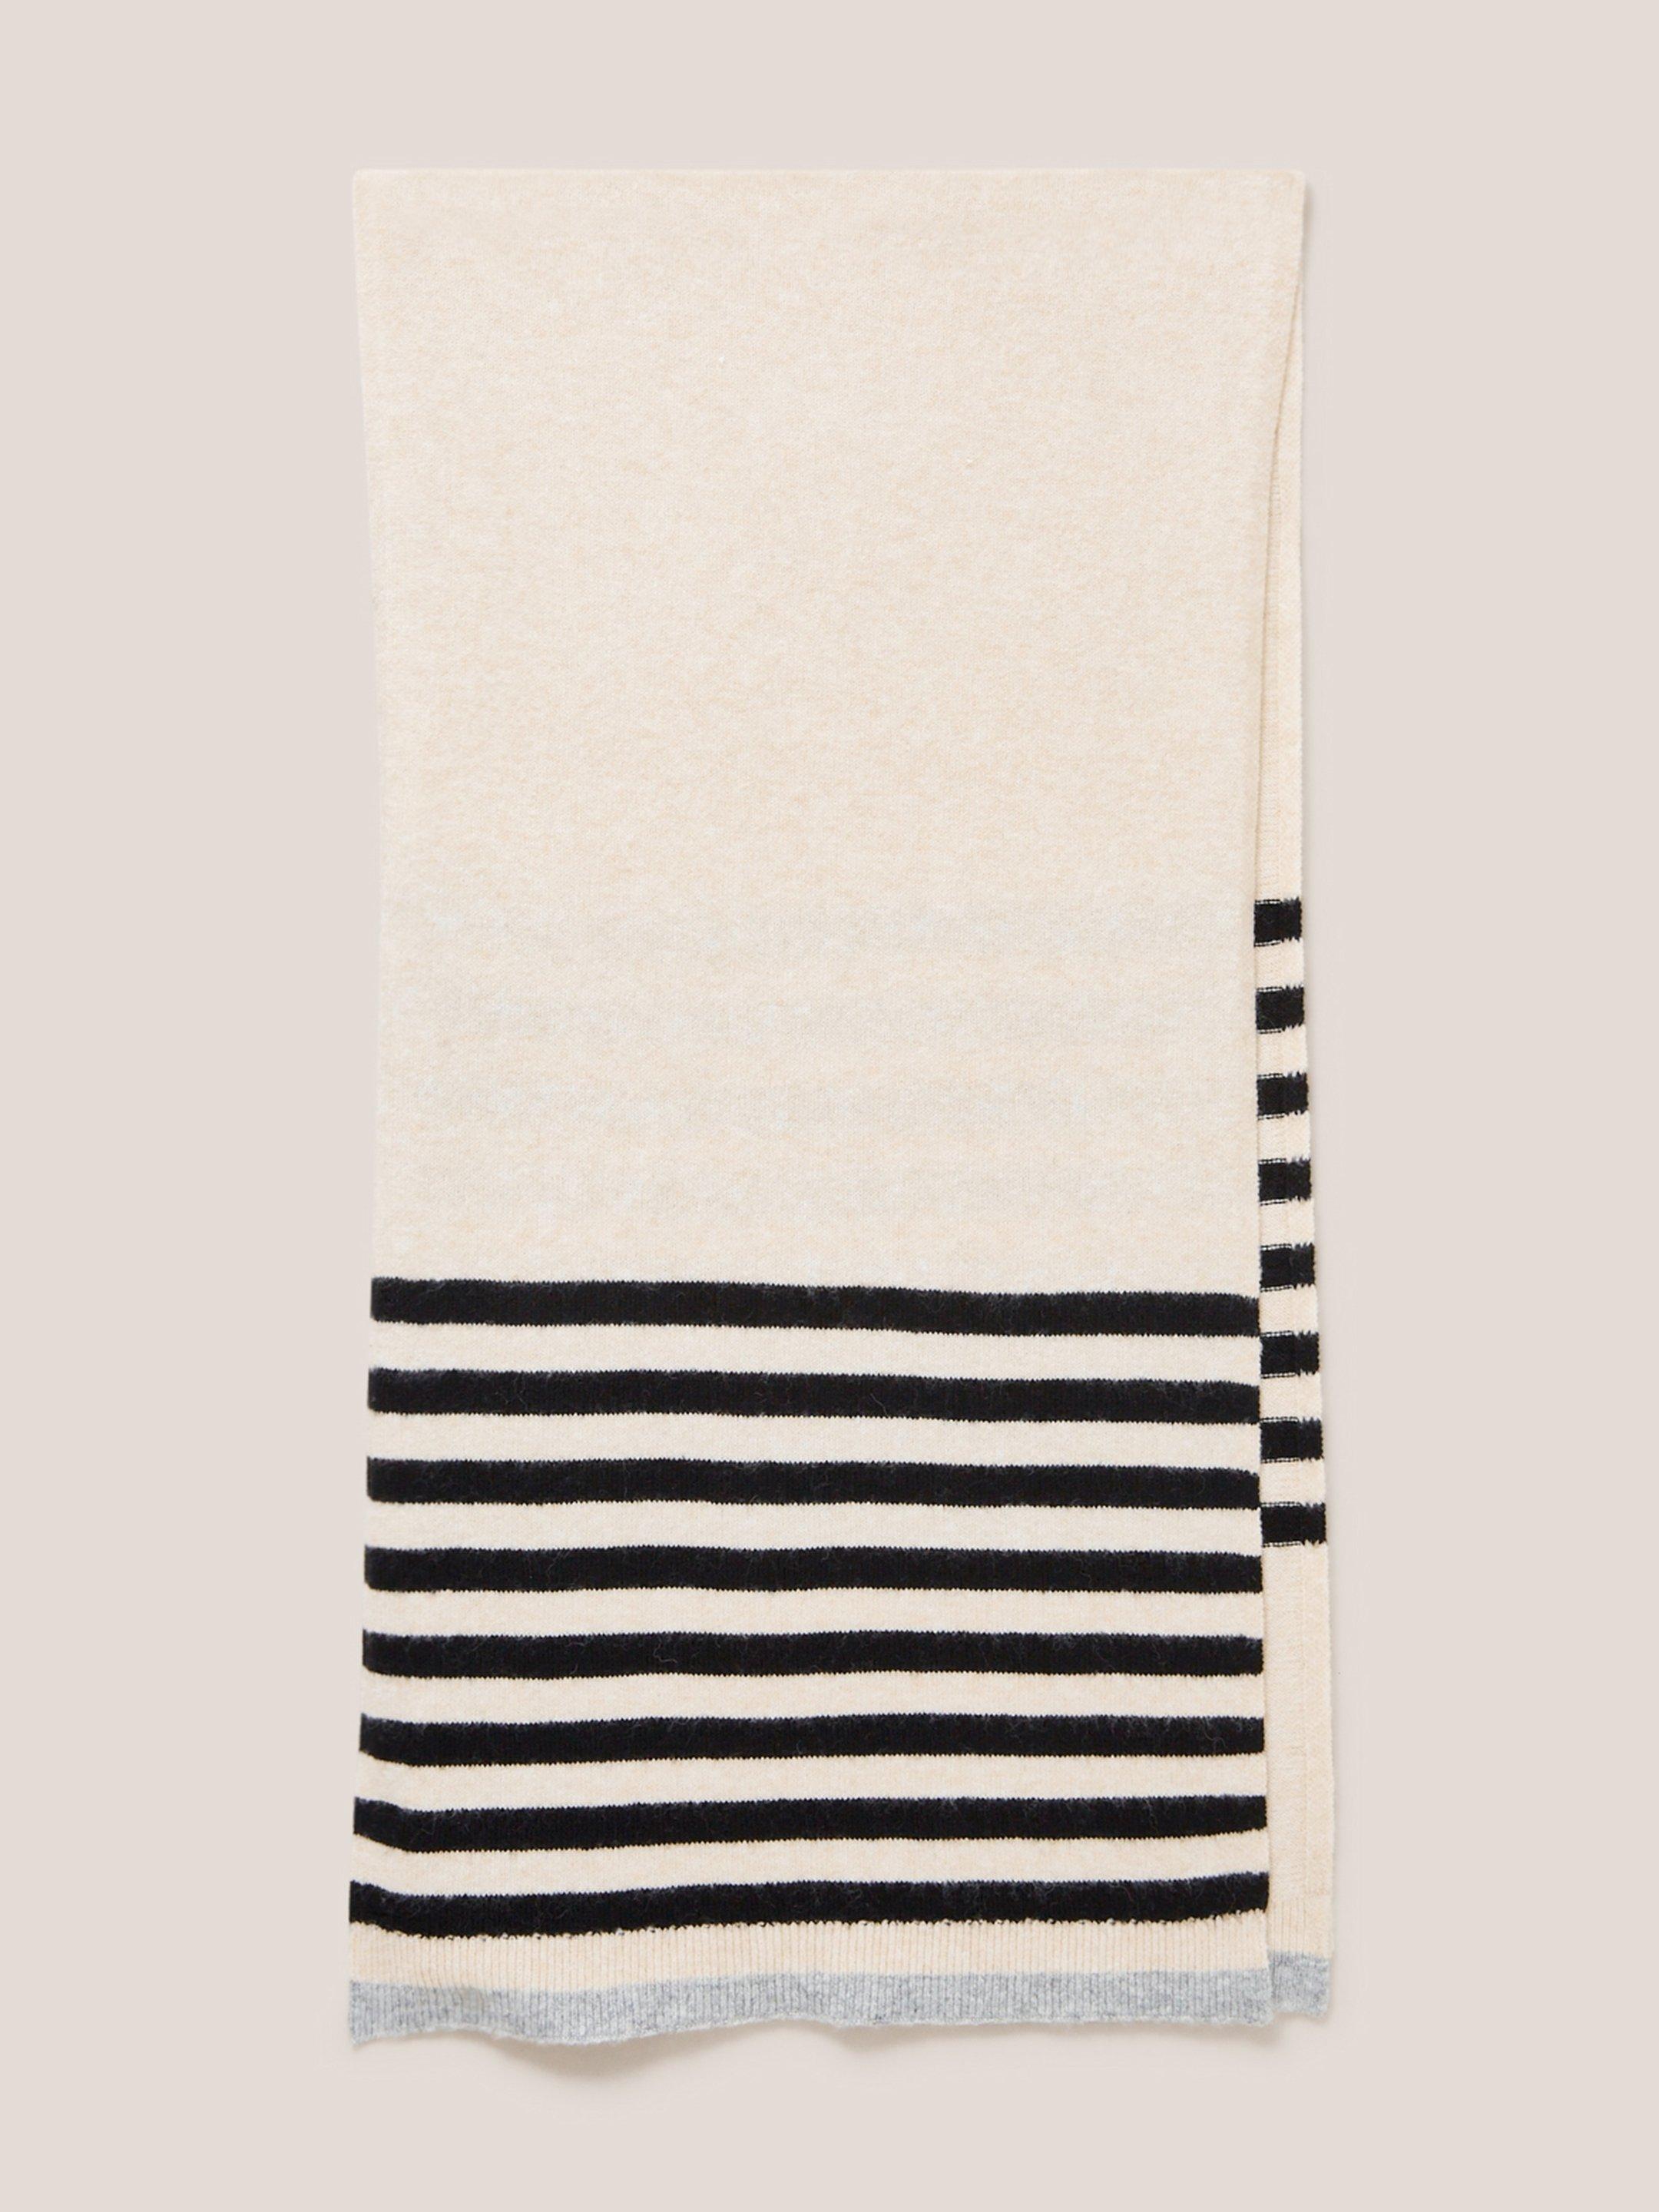 Sienna Fine Knit Scarf in NAT MLT - FLAT FRONT